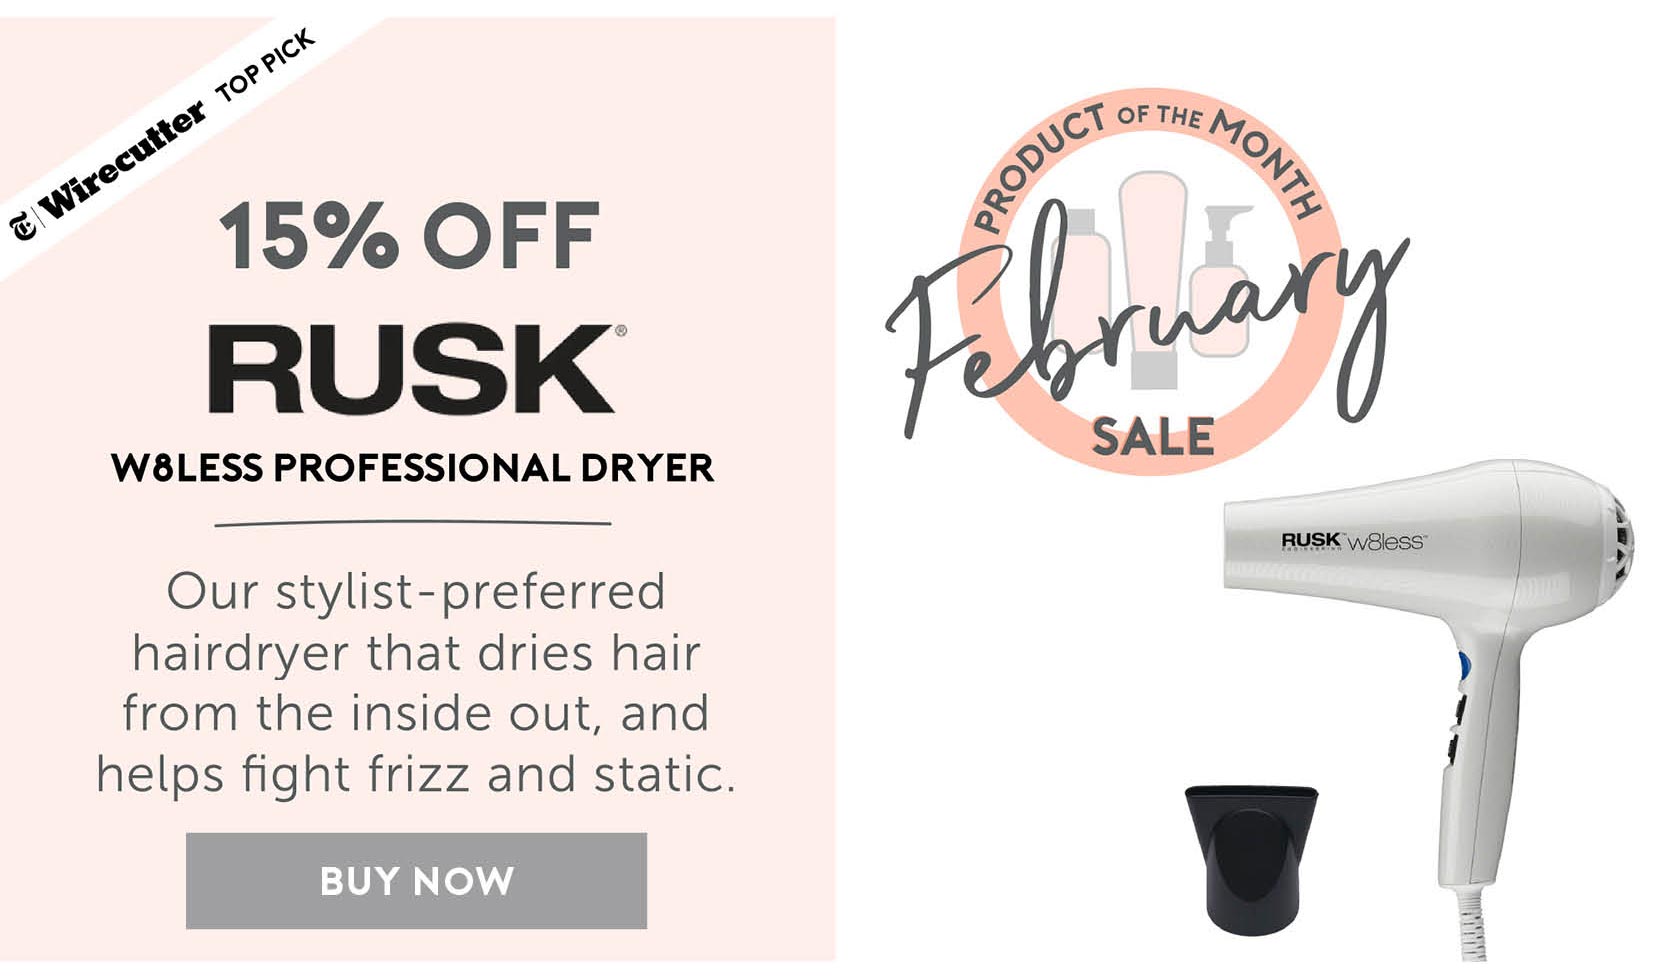 February Product of the Month Sale - 15% off Rusk W8less Professional Dryer! Our stylist-preferred hairdryer that dries hair from the inside out, and helps fight frizz and static. BUY NOW. 